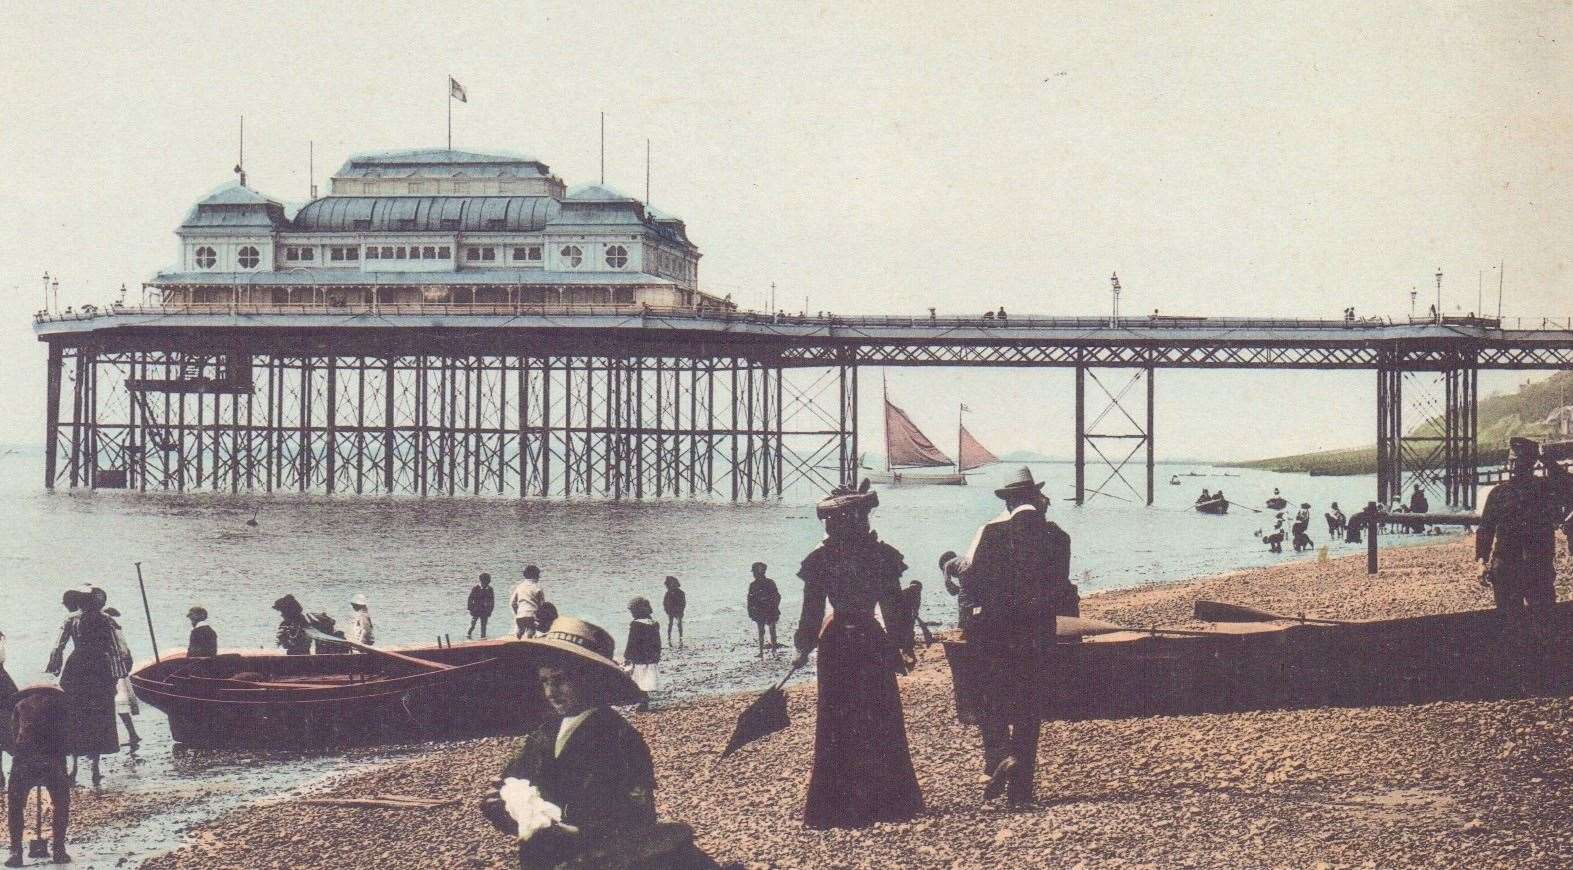 The pier was removed in 1954